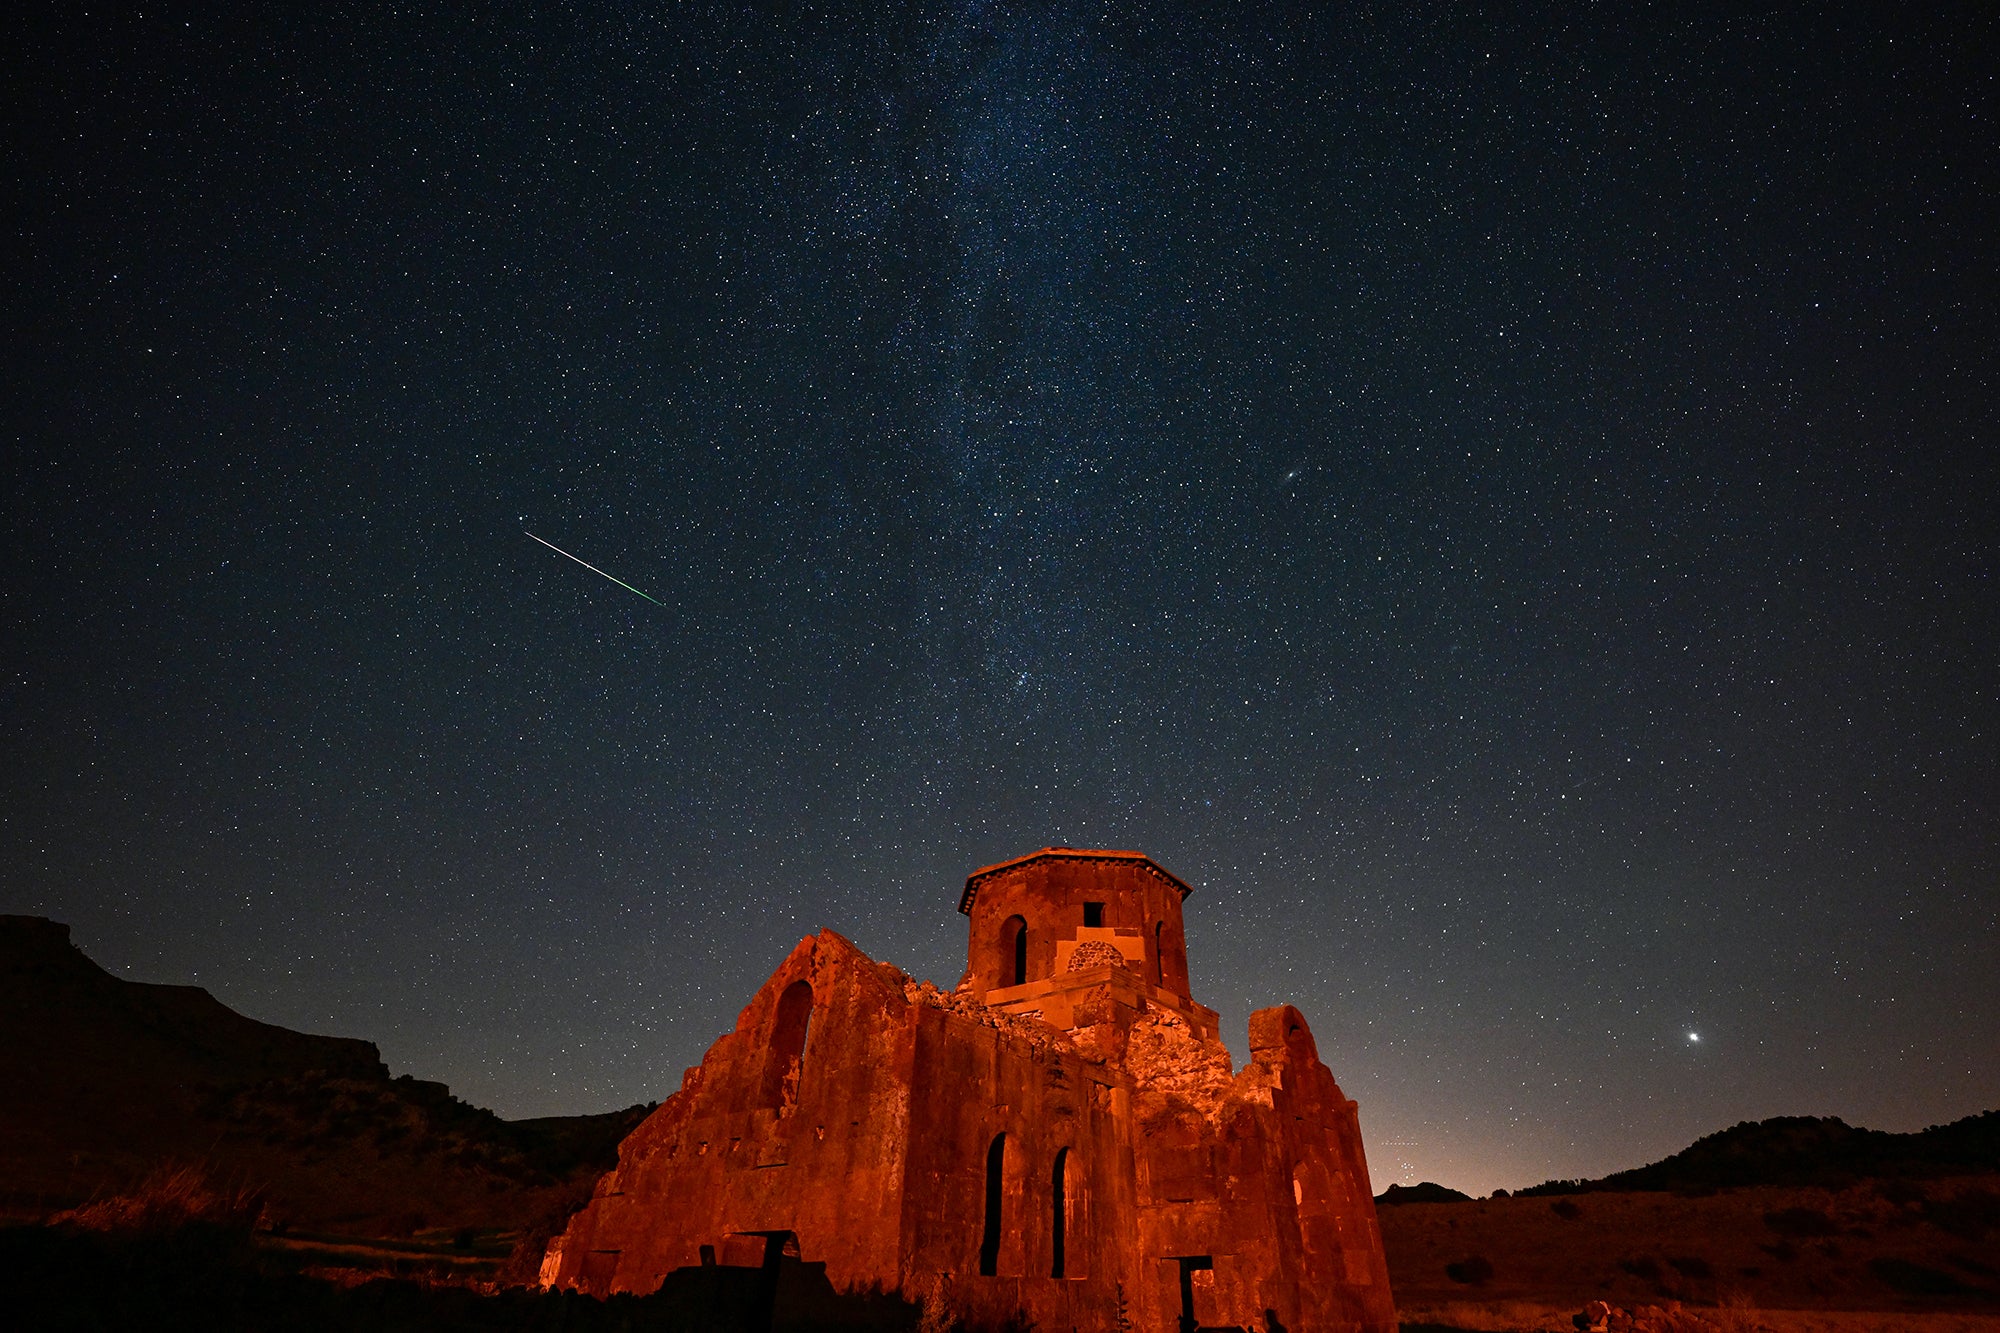 AKSARAY, TURKIYE - AUGUST 12: Perseid meteor shower is observed over Red Church and Guzelyurt Monastery Valley in Guzelyurt district of Aksaray, Turkiye on August 12, 2023. (Photo by Aytug Can Sencar/Anadolu Agency via Getty Images)